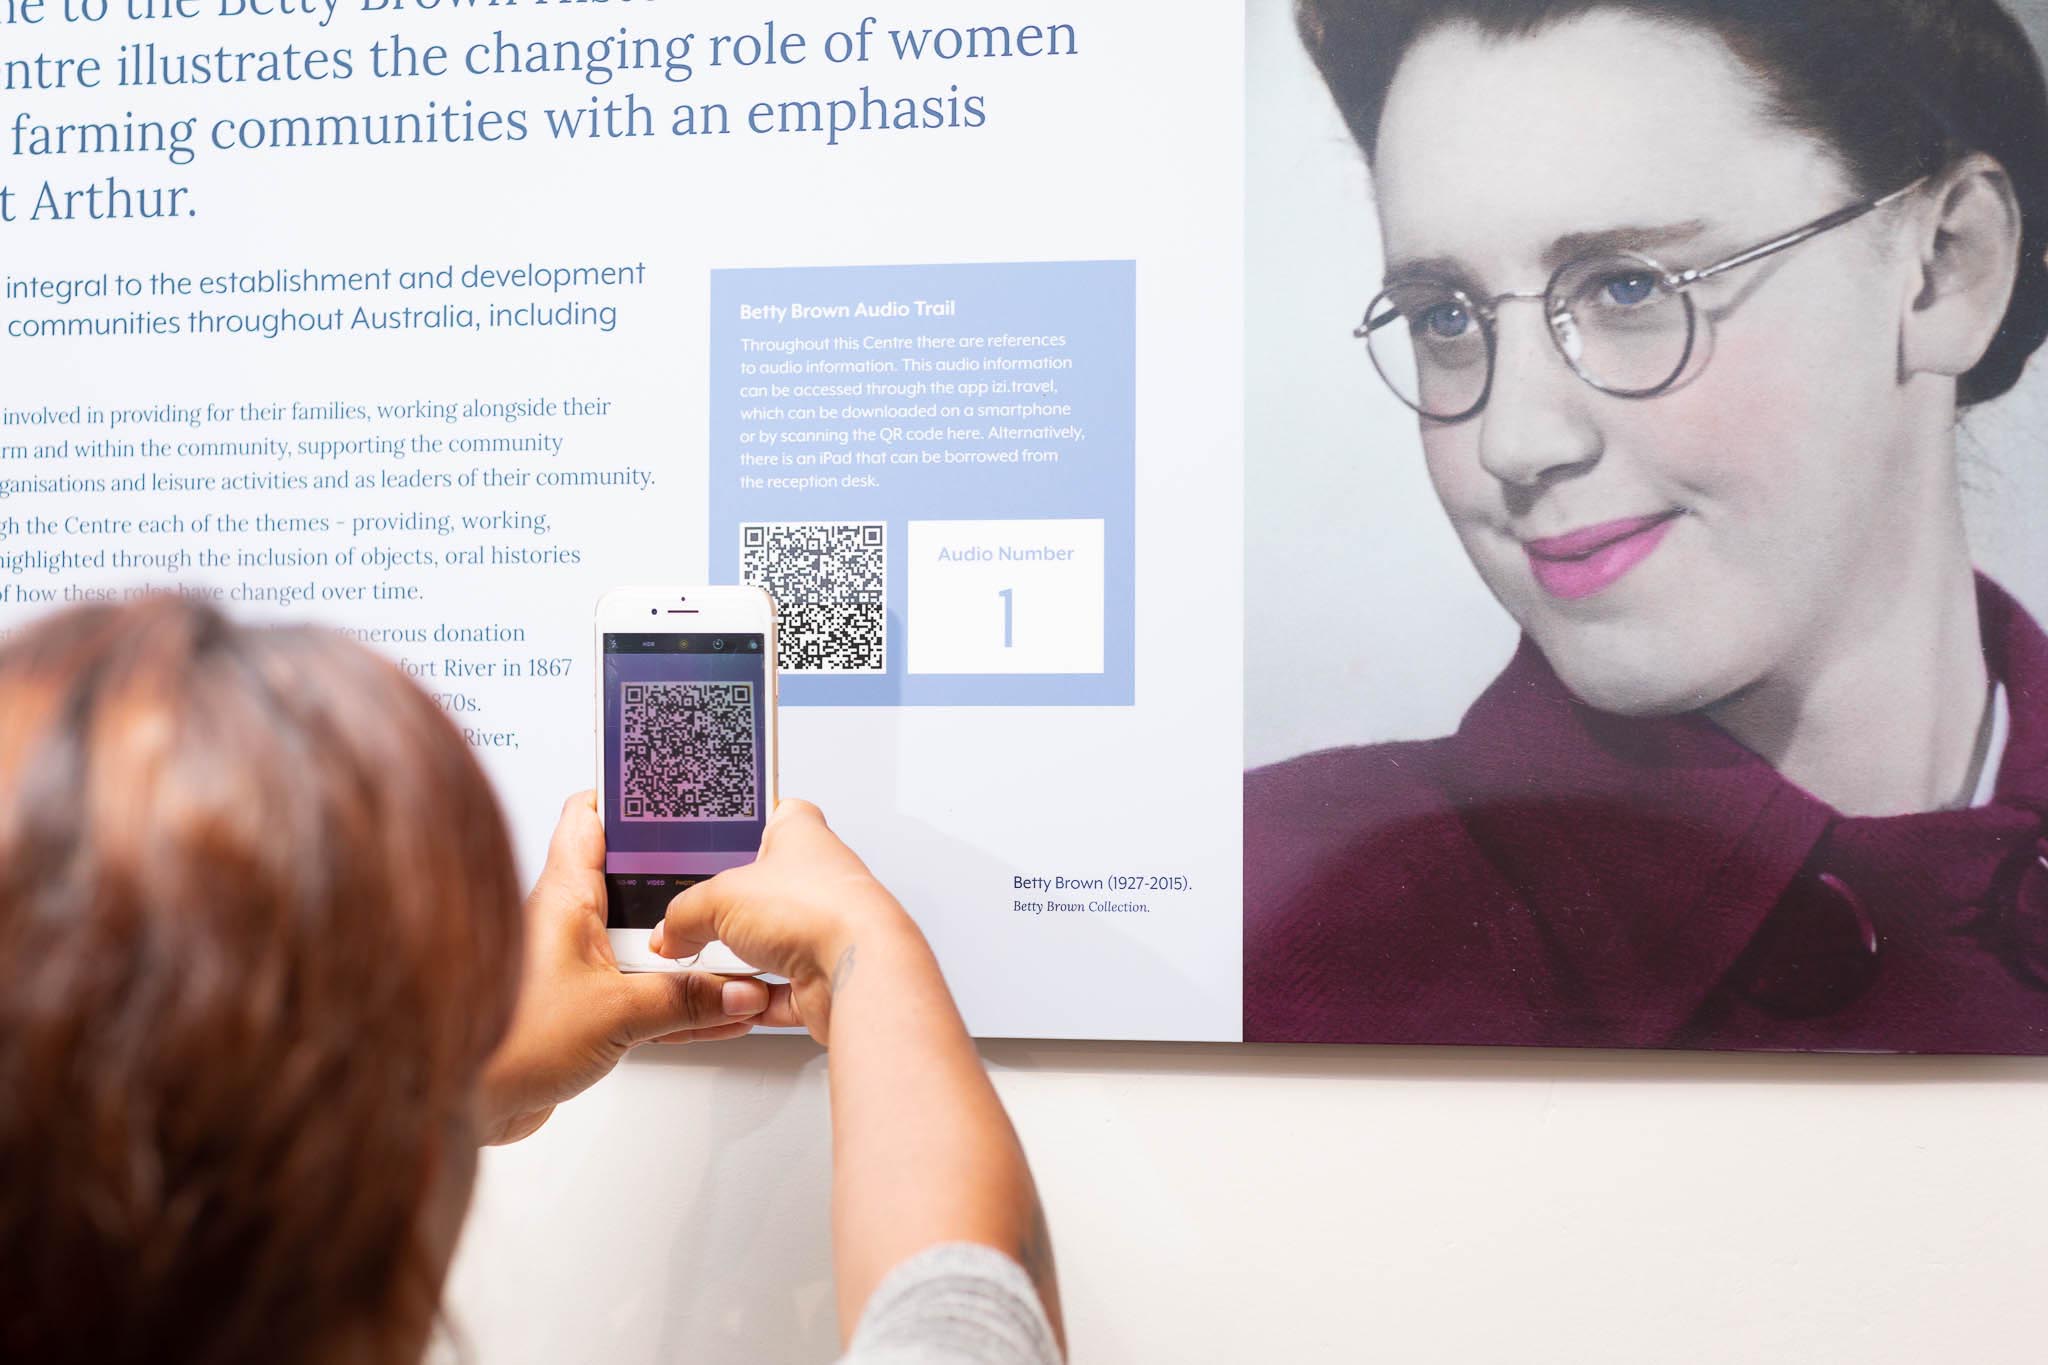 Museum visitor scanning QR code with smartphone. Photo by Caro Telfer.